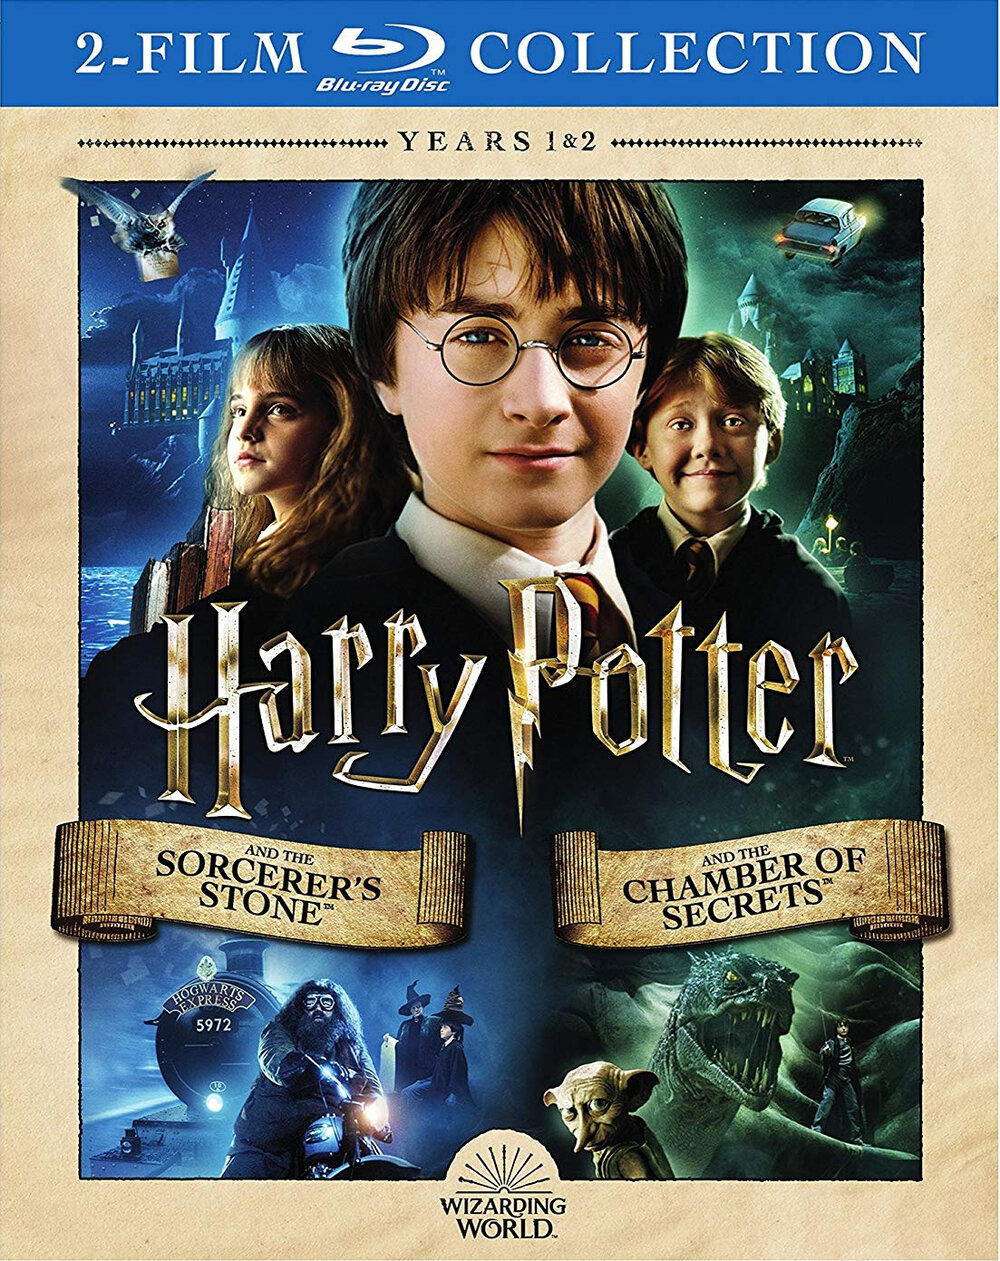 Are there any differences between the theatrical and director's cut versions of the Harry Potter movies? 2